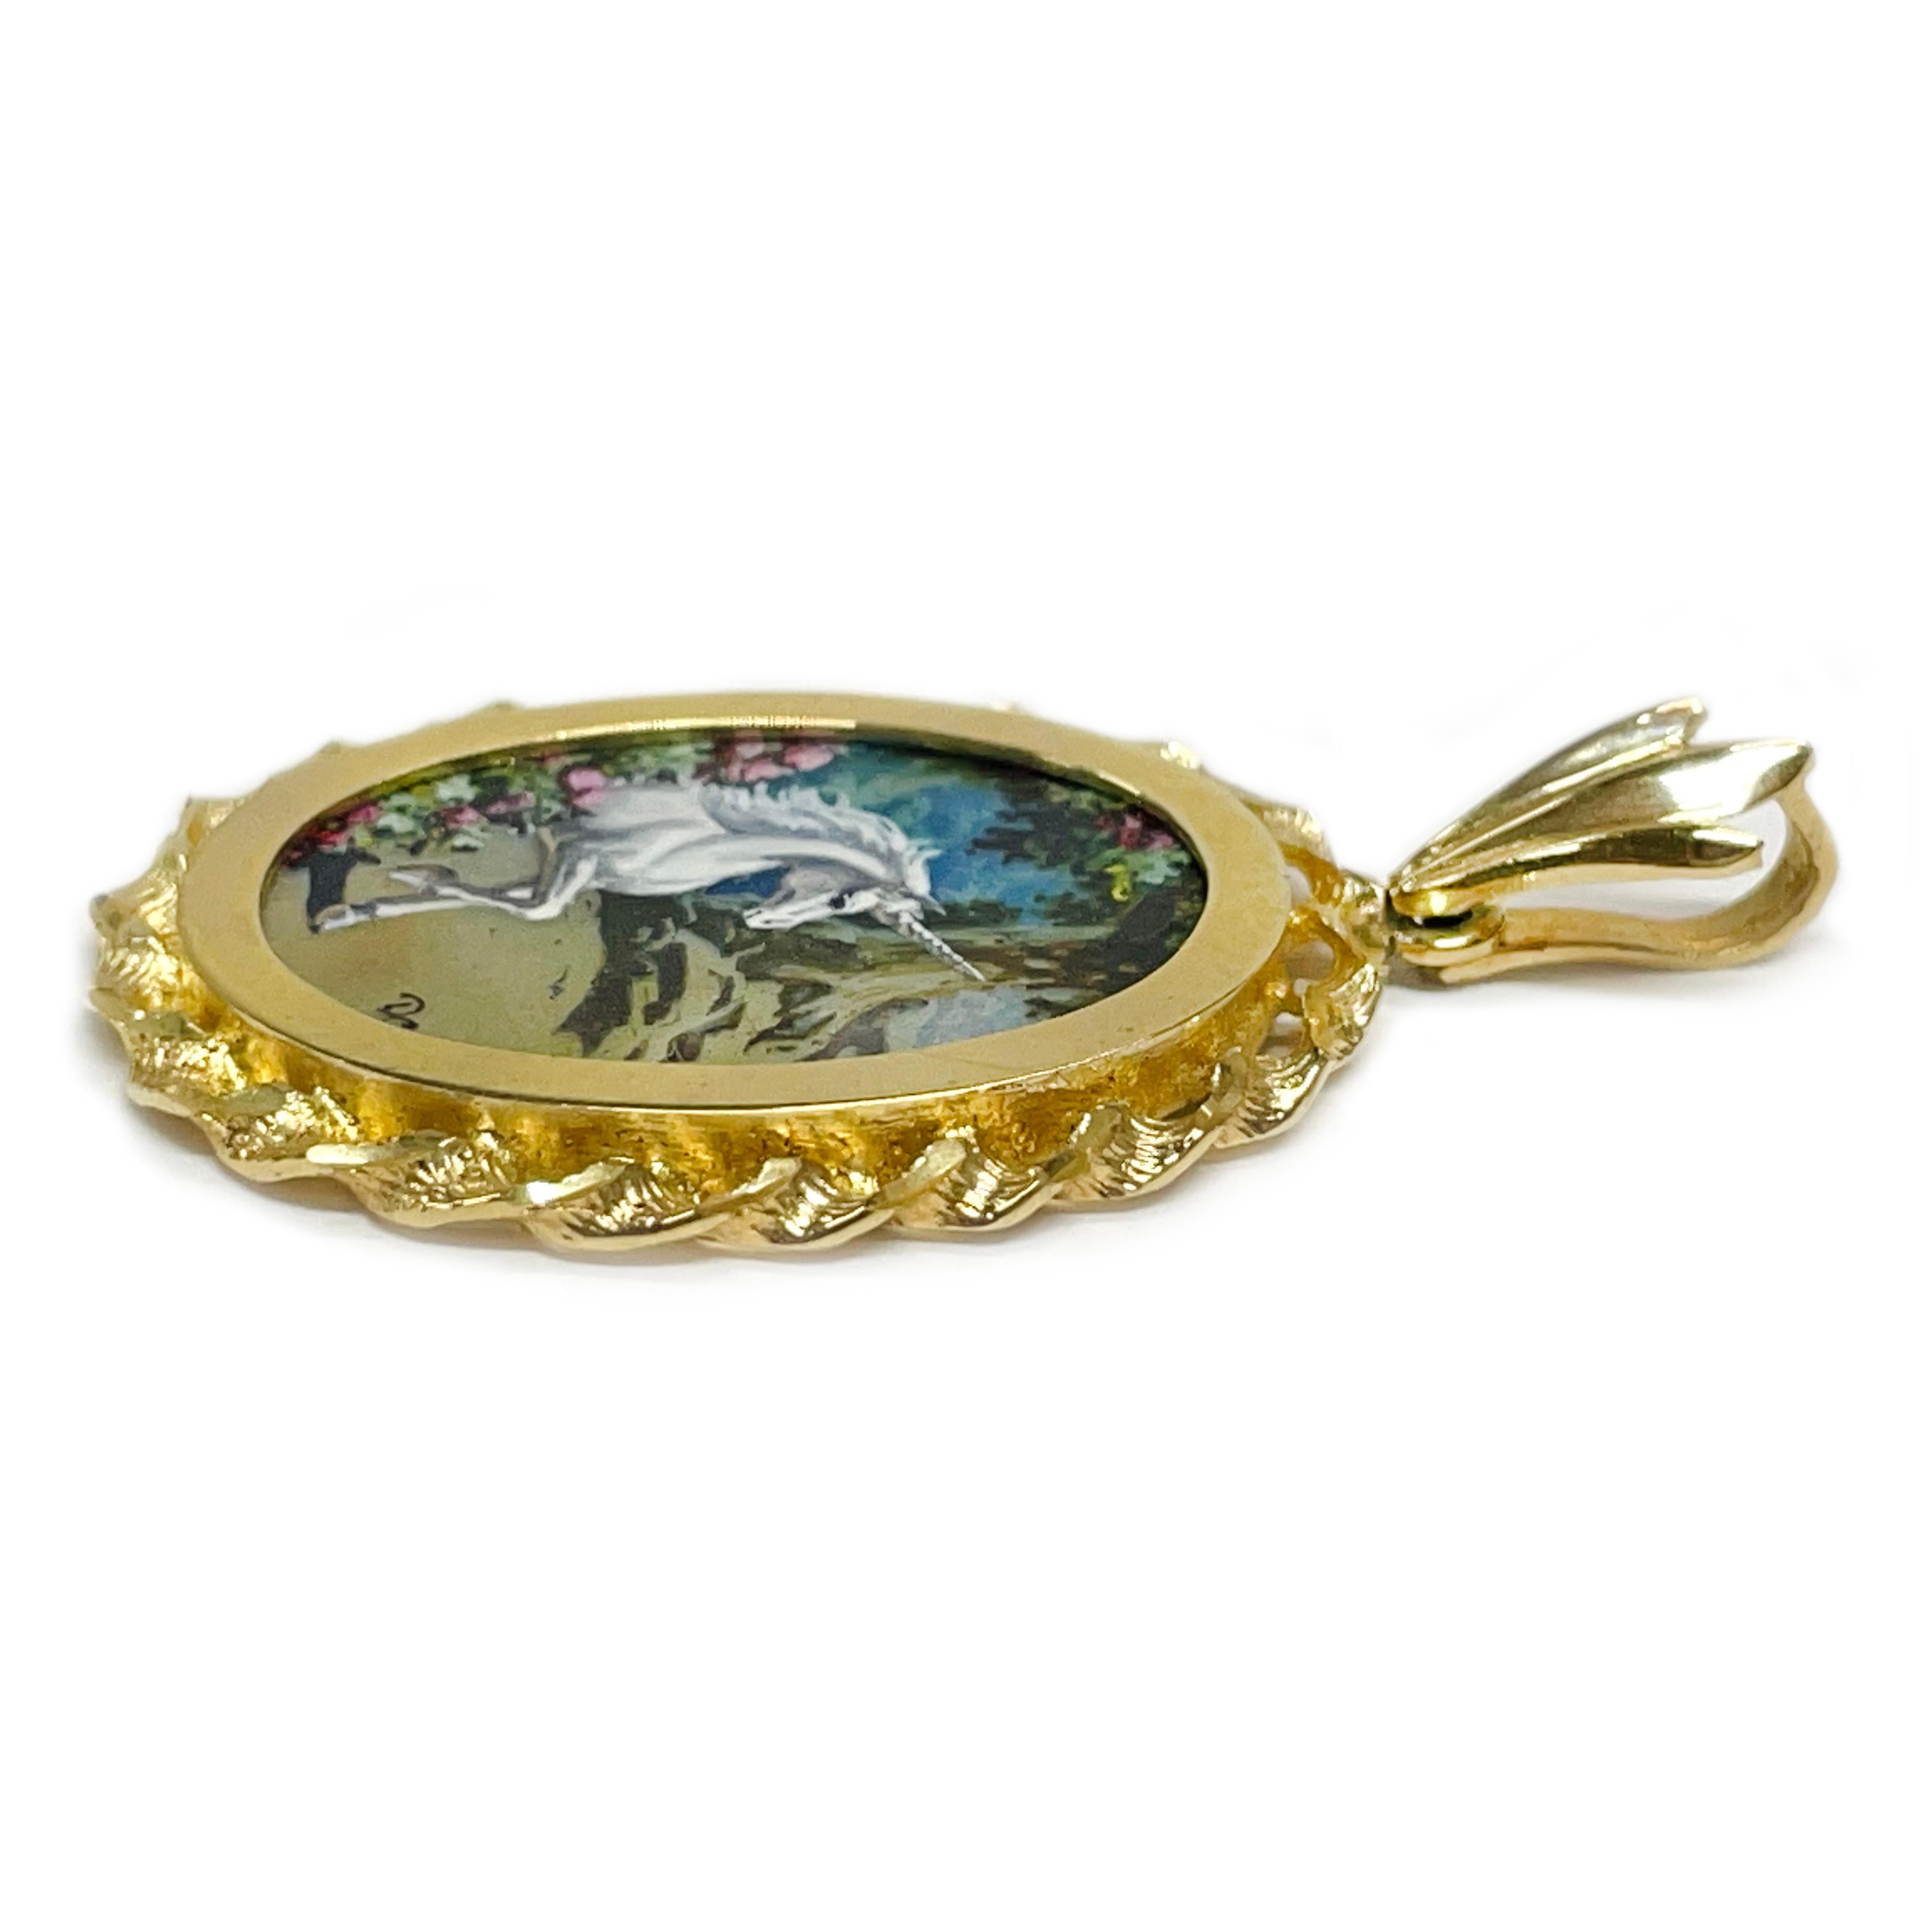 Contemporary 14 Karat Unicorn Masterpiece Hand Painted Mother-of-Pearl Pendant #0770 For Sale